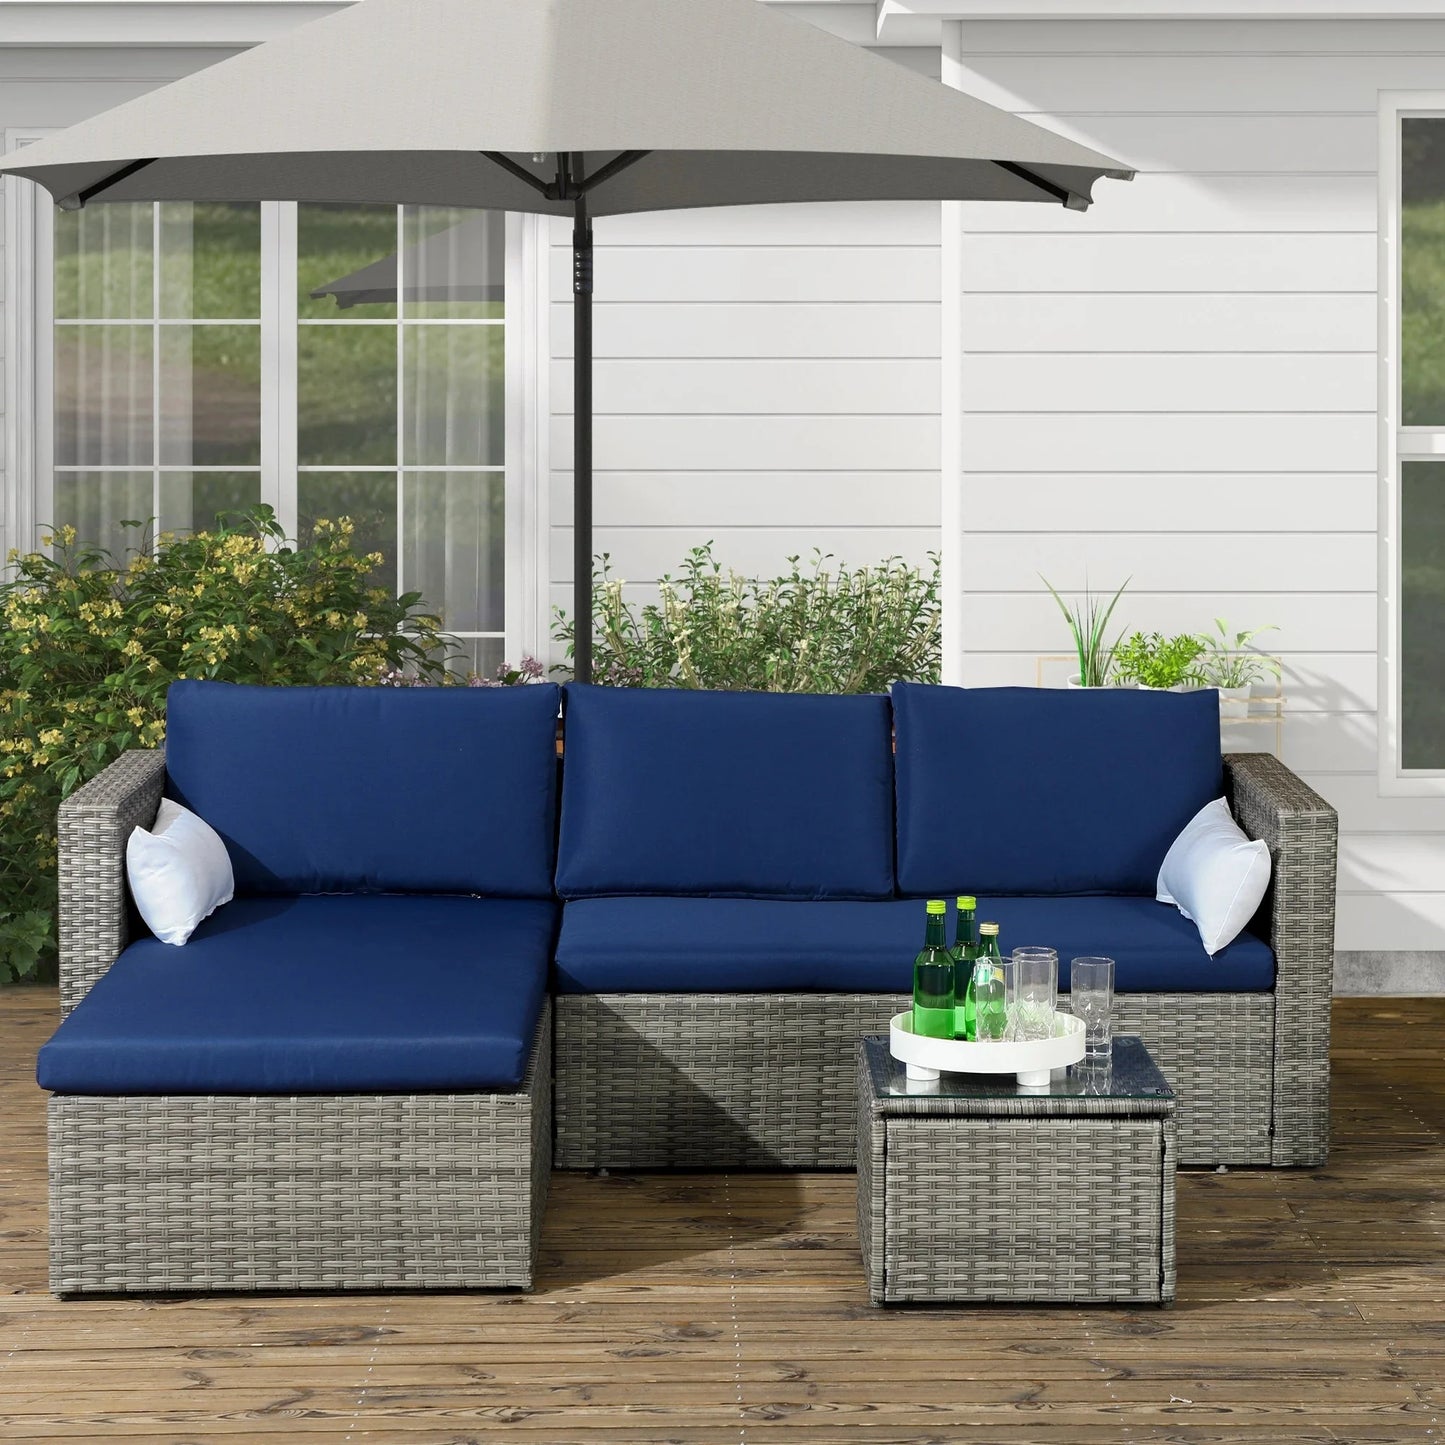 Aosom Sectional 3 Piece Modern Outdoor Patio Hand Woven Rattan Wicker Sectional Sofa with Coffee Table - Available in 5 Colours